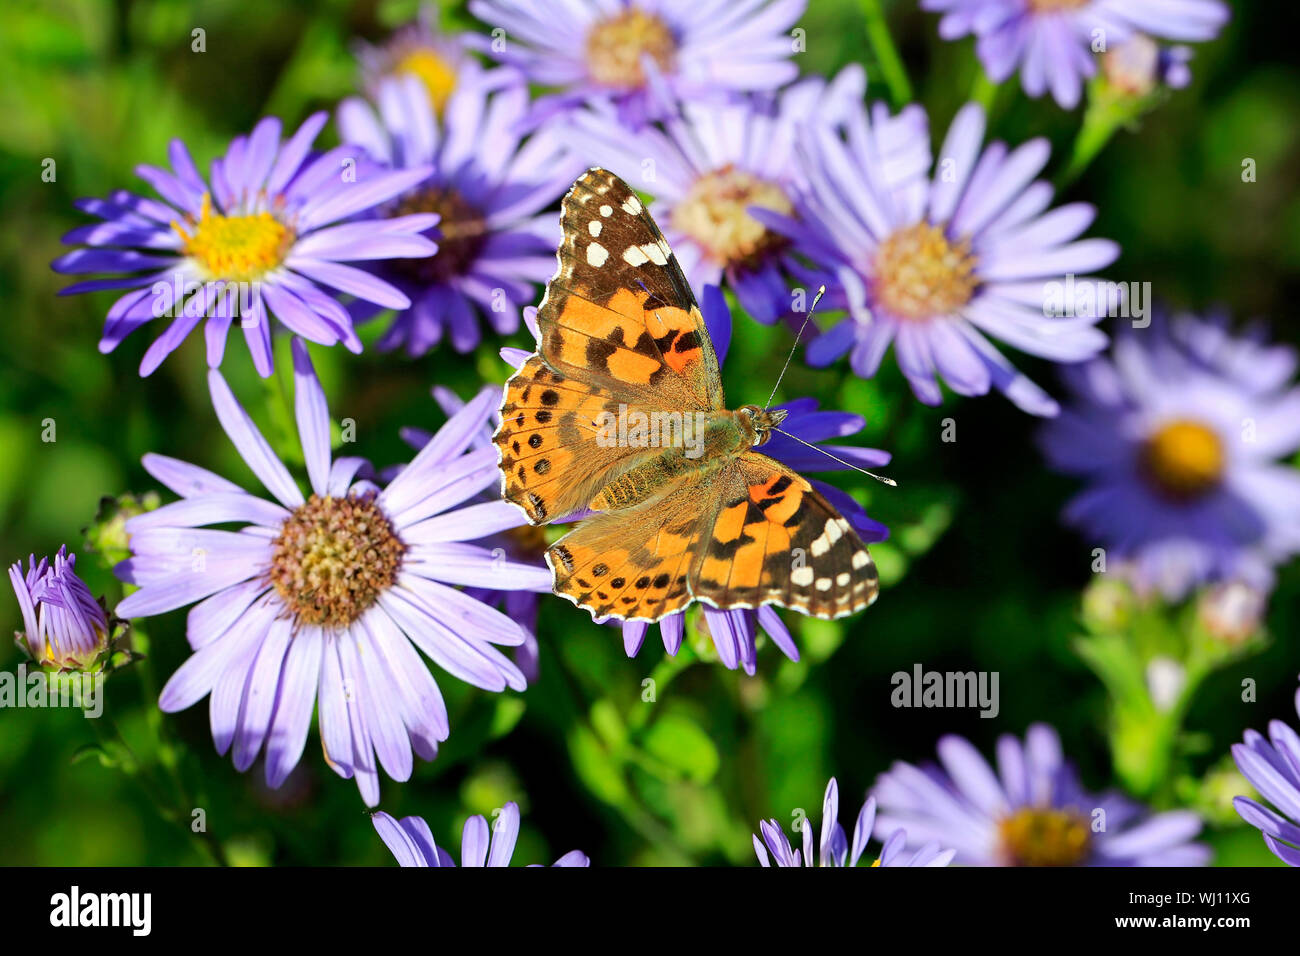 Painted Lady butterfly, Vanessa cardui, feeding on New York Asters, Symphyotrichum novi-belgii on a day of autumn in Finland. Shallow dof. Stock Photo